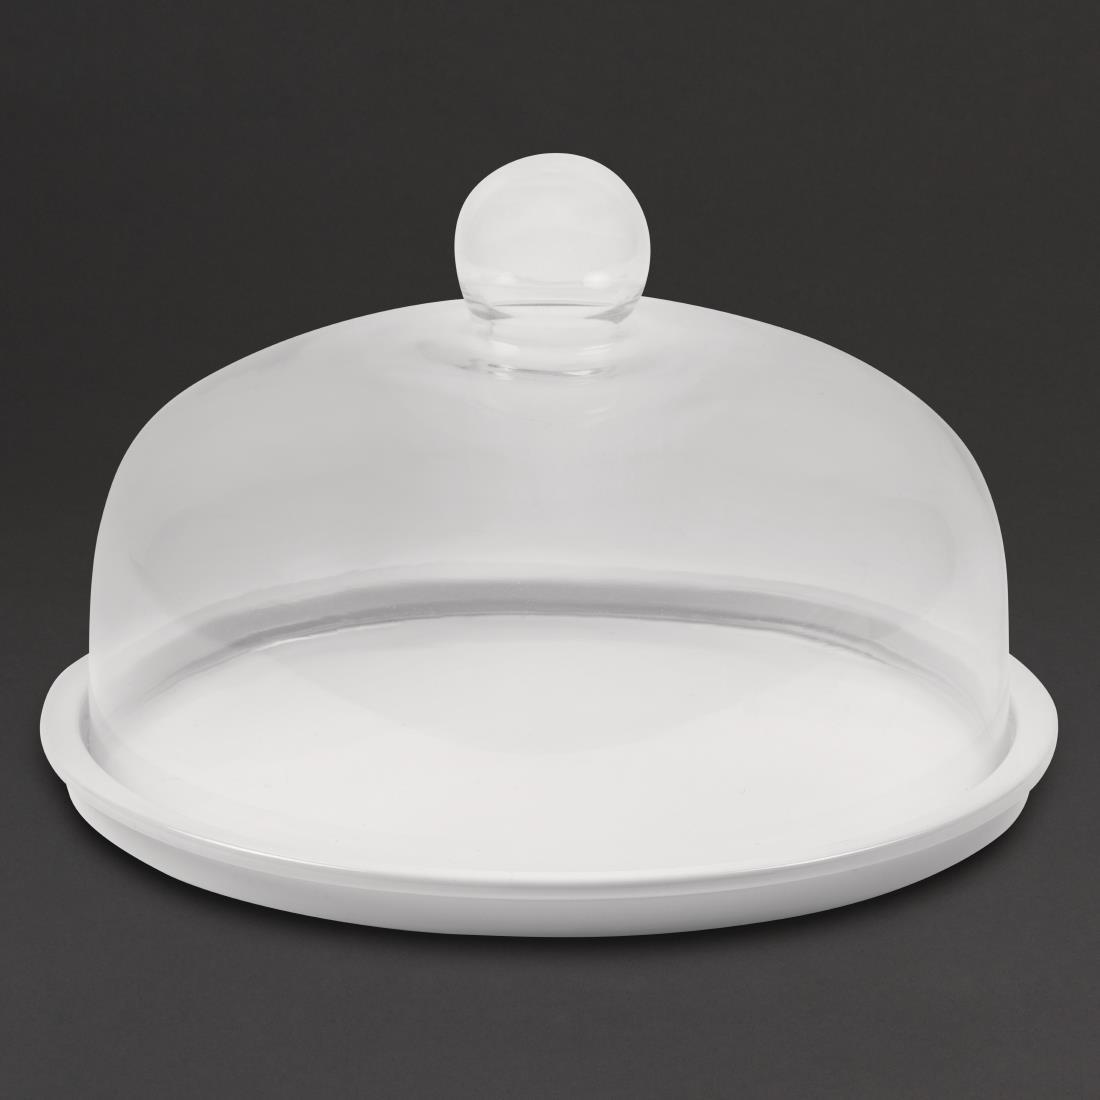 Porcelain Cake Stand Plate 285mm - CM748  - 4